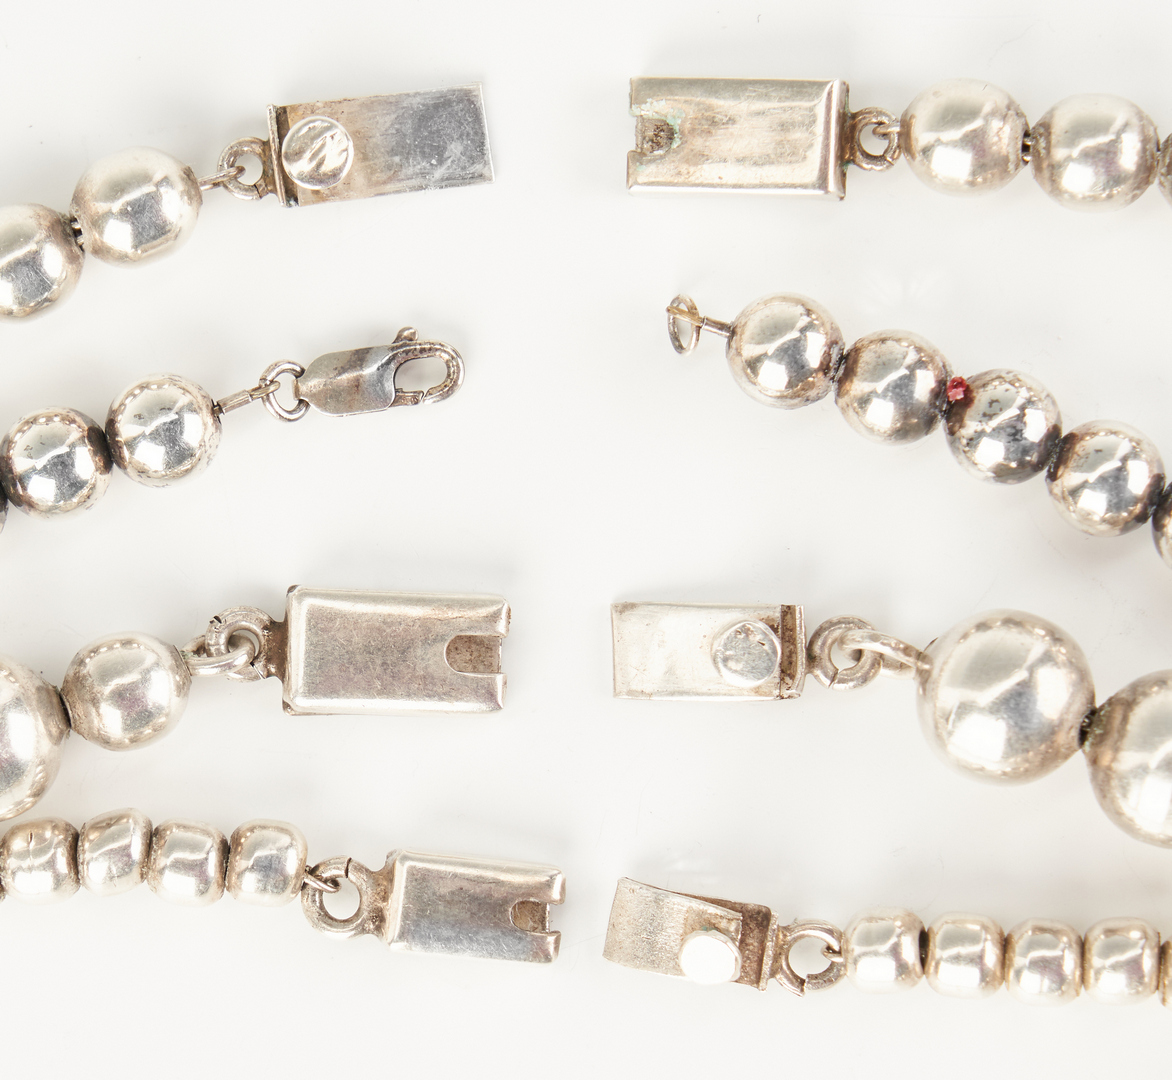 Lot 944: Group of 10 Mexican Sterling Silver Jewelry Items